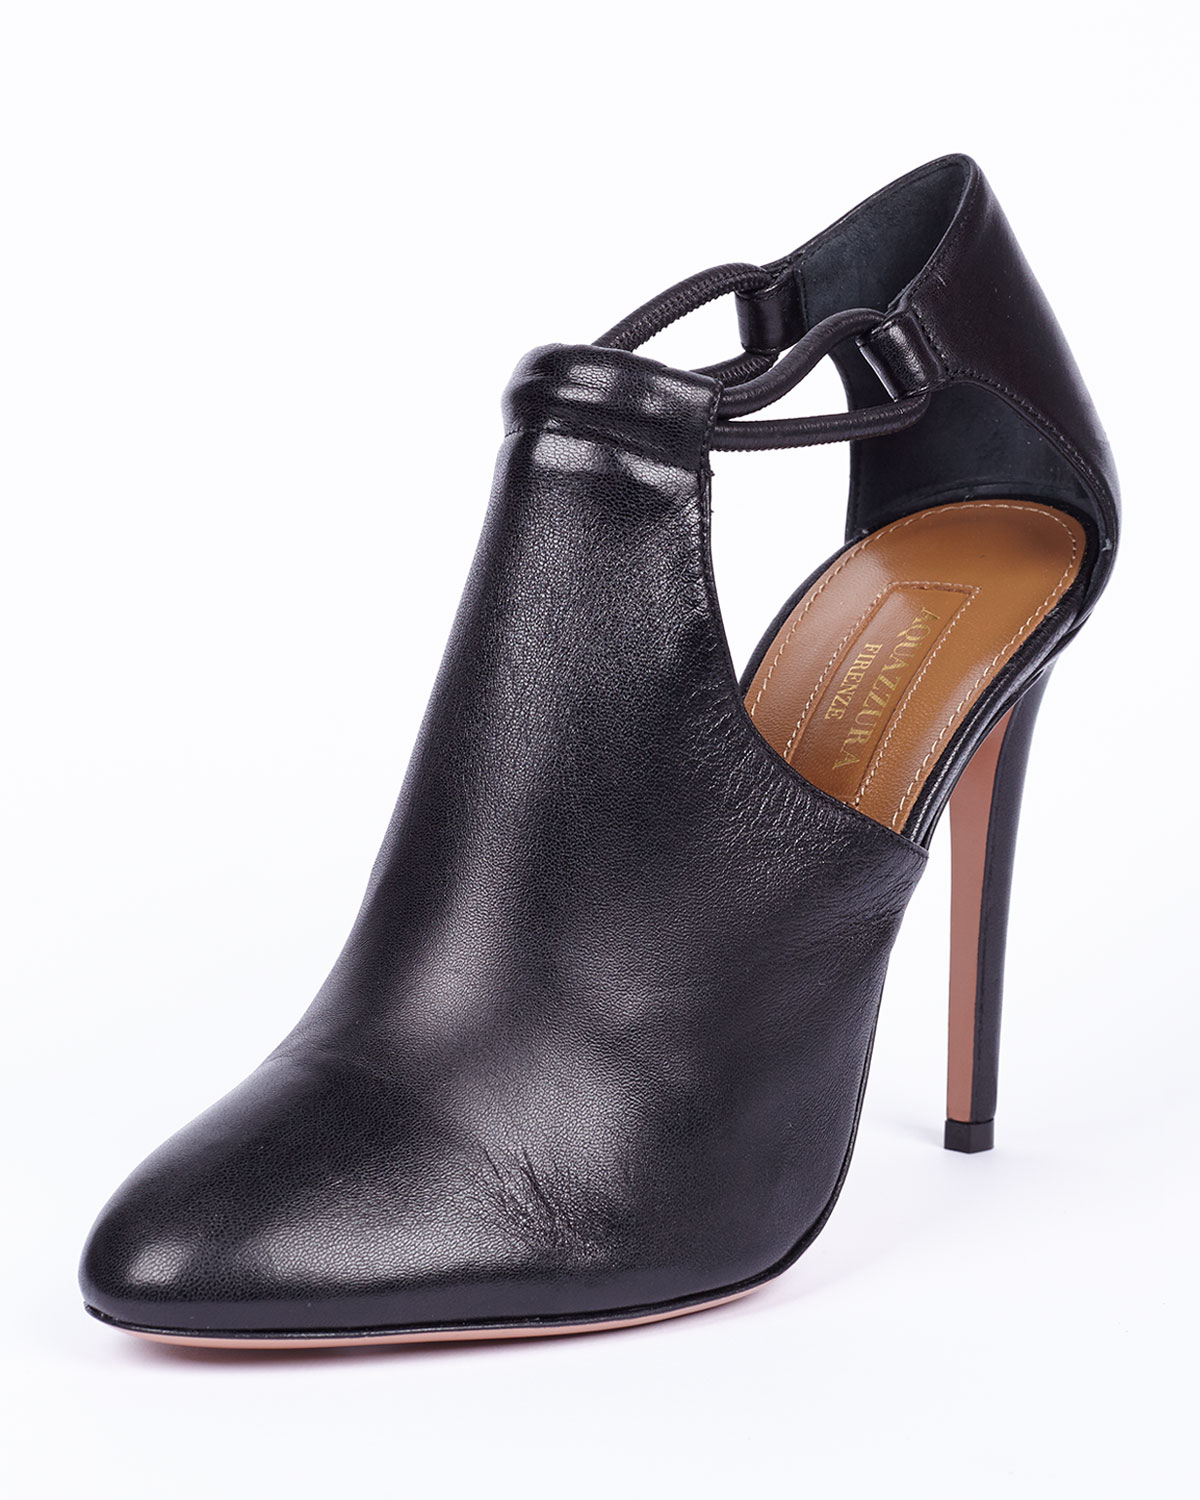 Lyst - Aquazzura Darling Leather Side-Cut-Out Booties in Black